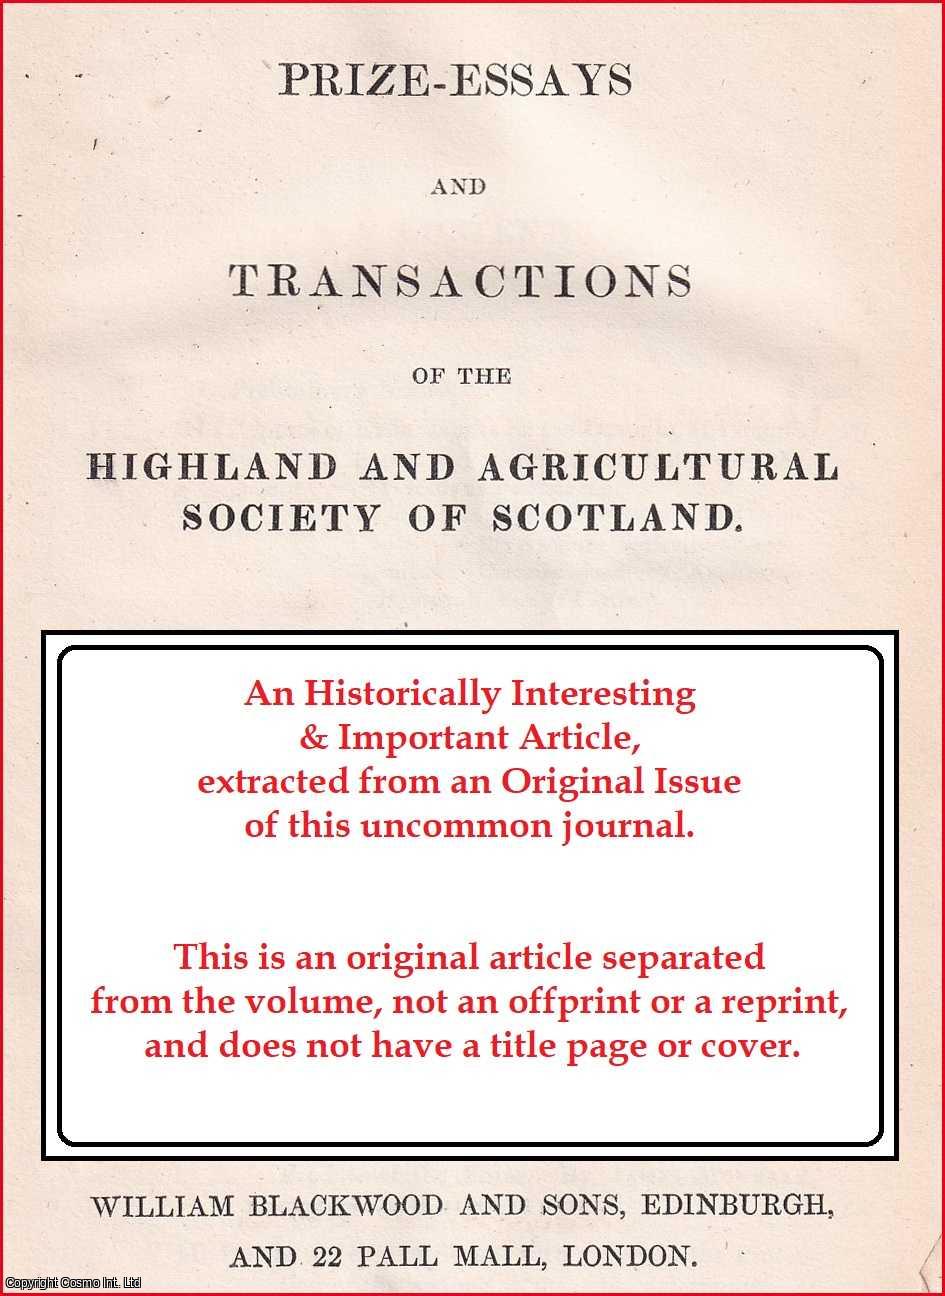 John Robison, Esq. Sec. R.S.E. - The Indian Saw as Adapted to Pruning Trees. An uncommon original article from the Prize Essays and Transactions of the Highland Society of Scotland, 1832.